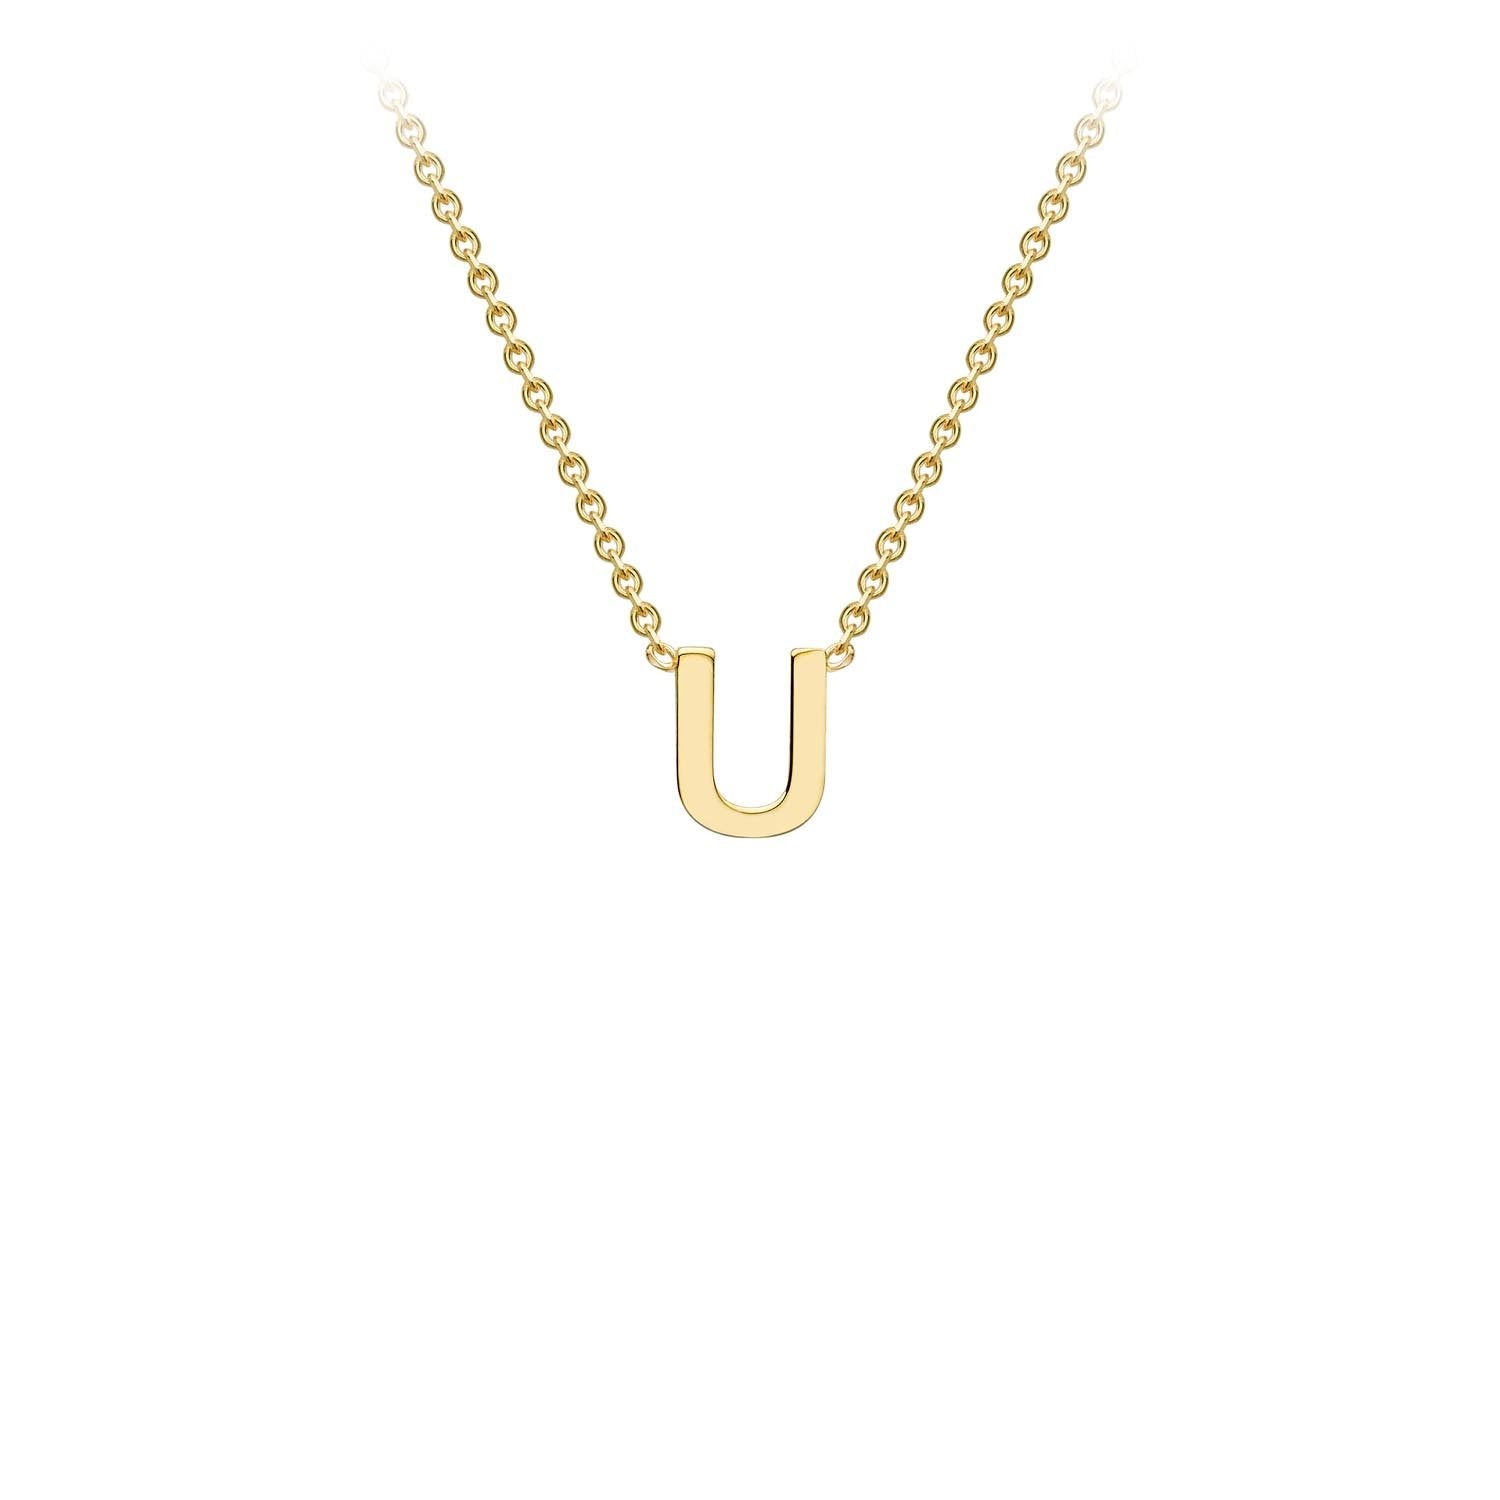 9ct Yellow Gold 'U' Petite Initial Adjustable Letter Necklace 38/43cm